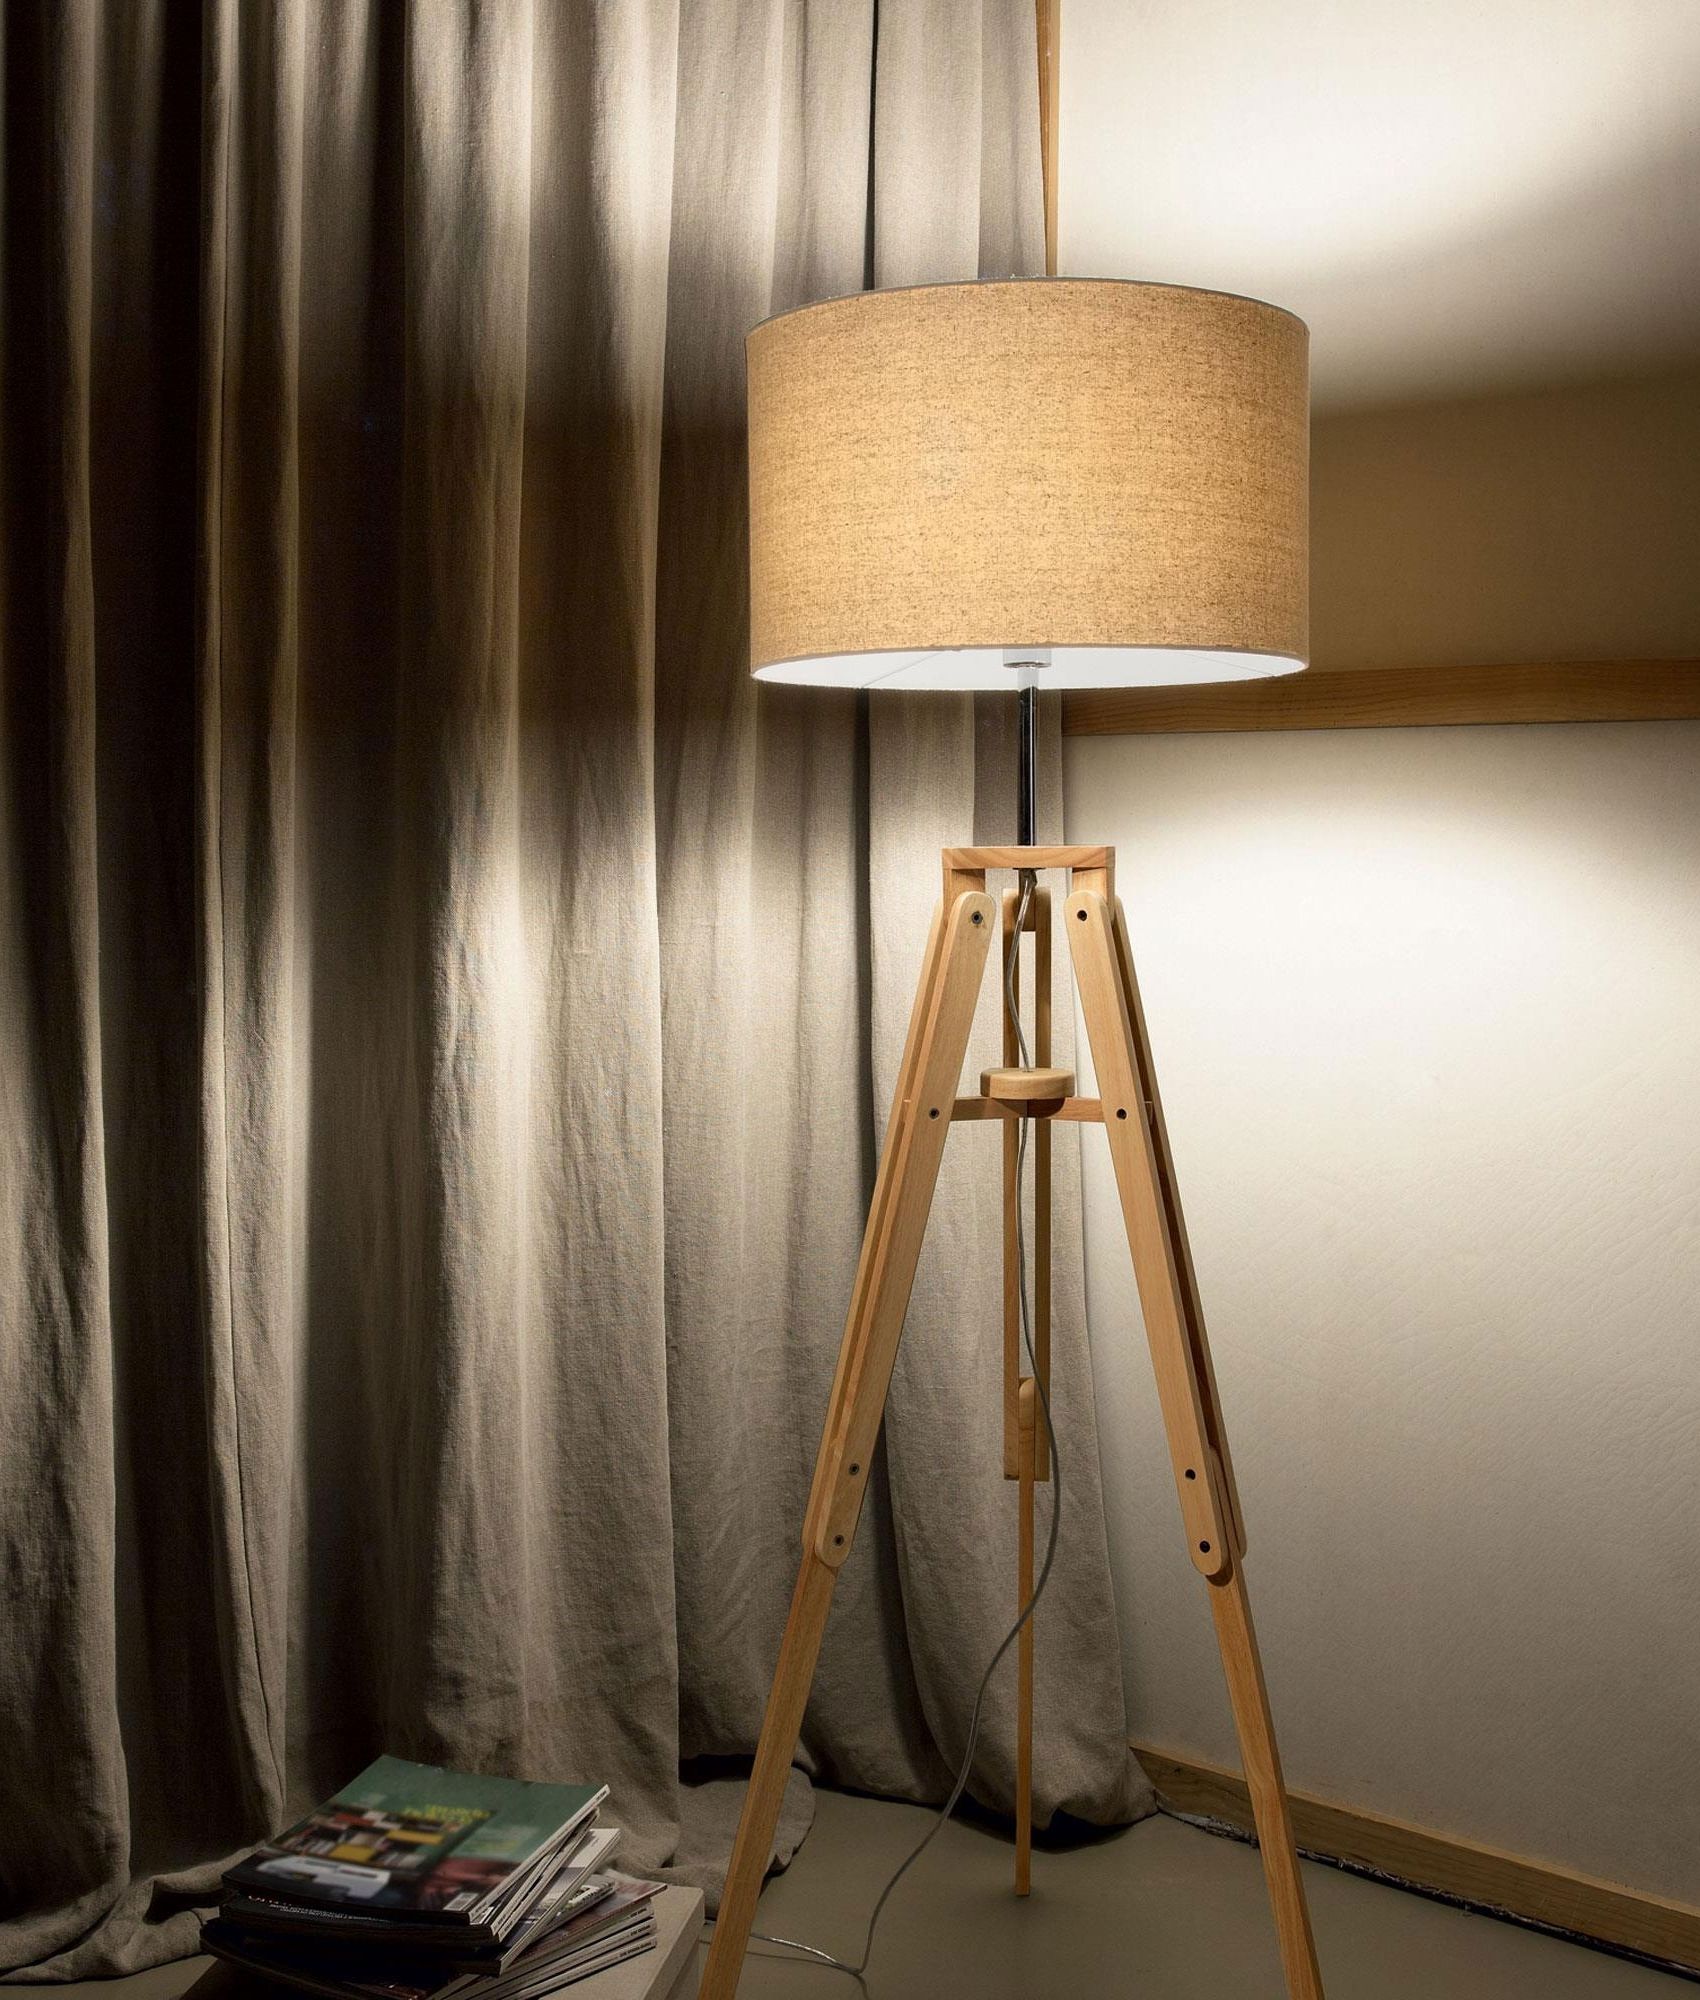 Shaded Natural Wood Tripod Floor Lamp With Regard To Wood Tripod Floor Lamps (View 13 of 20)